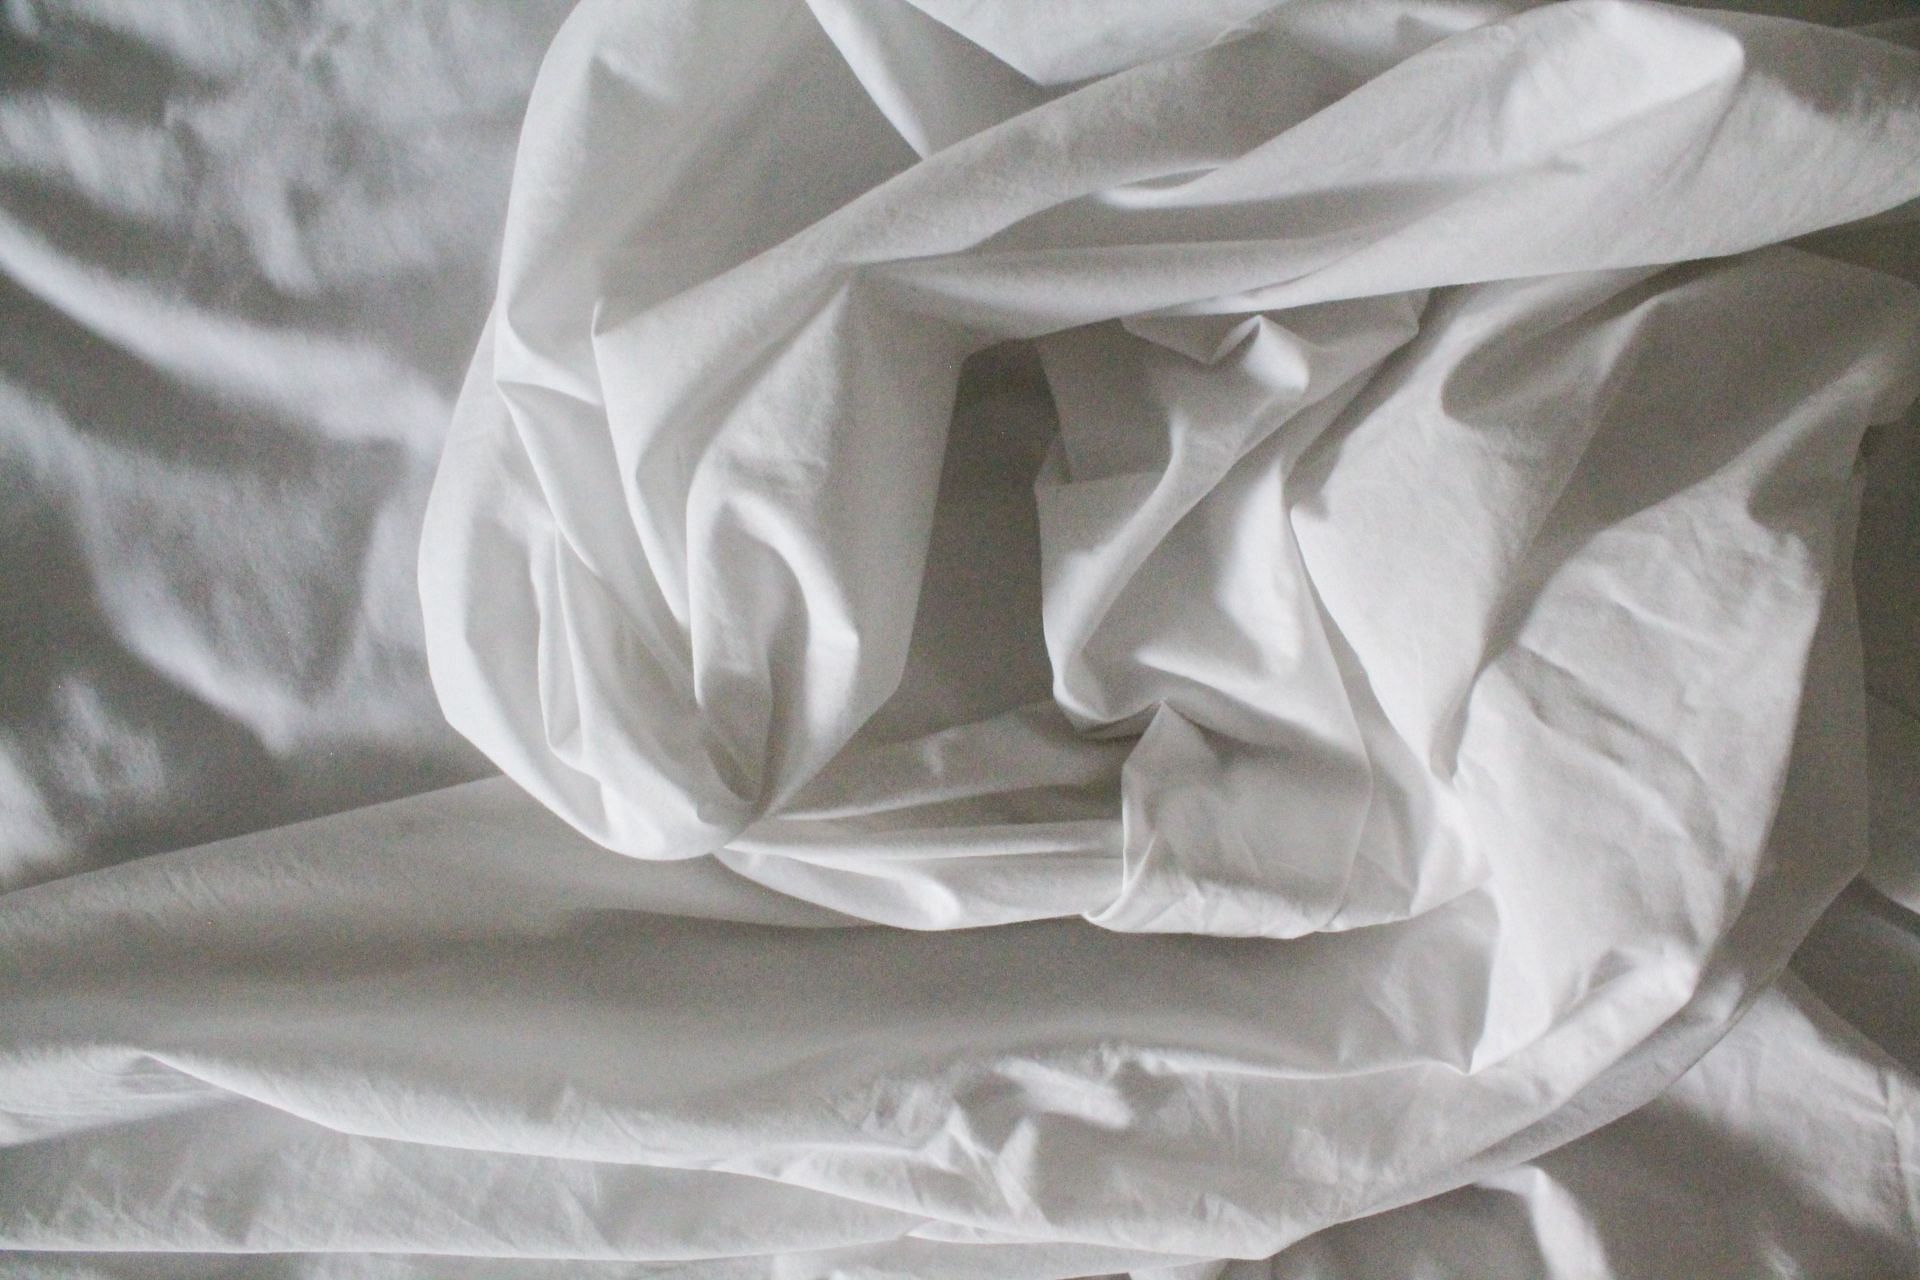 Bed sheets and skin - how are they related? (Image via Unsplash / Justine)